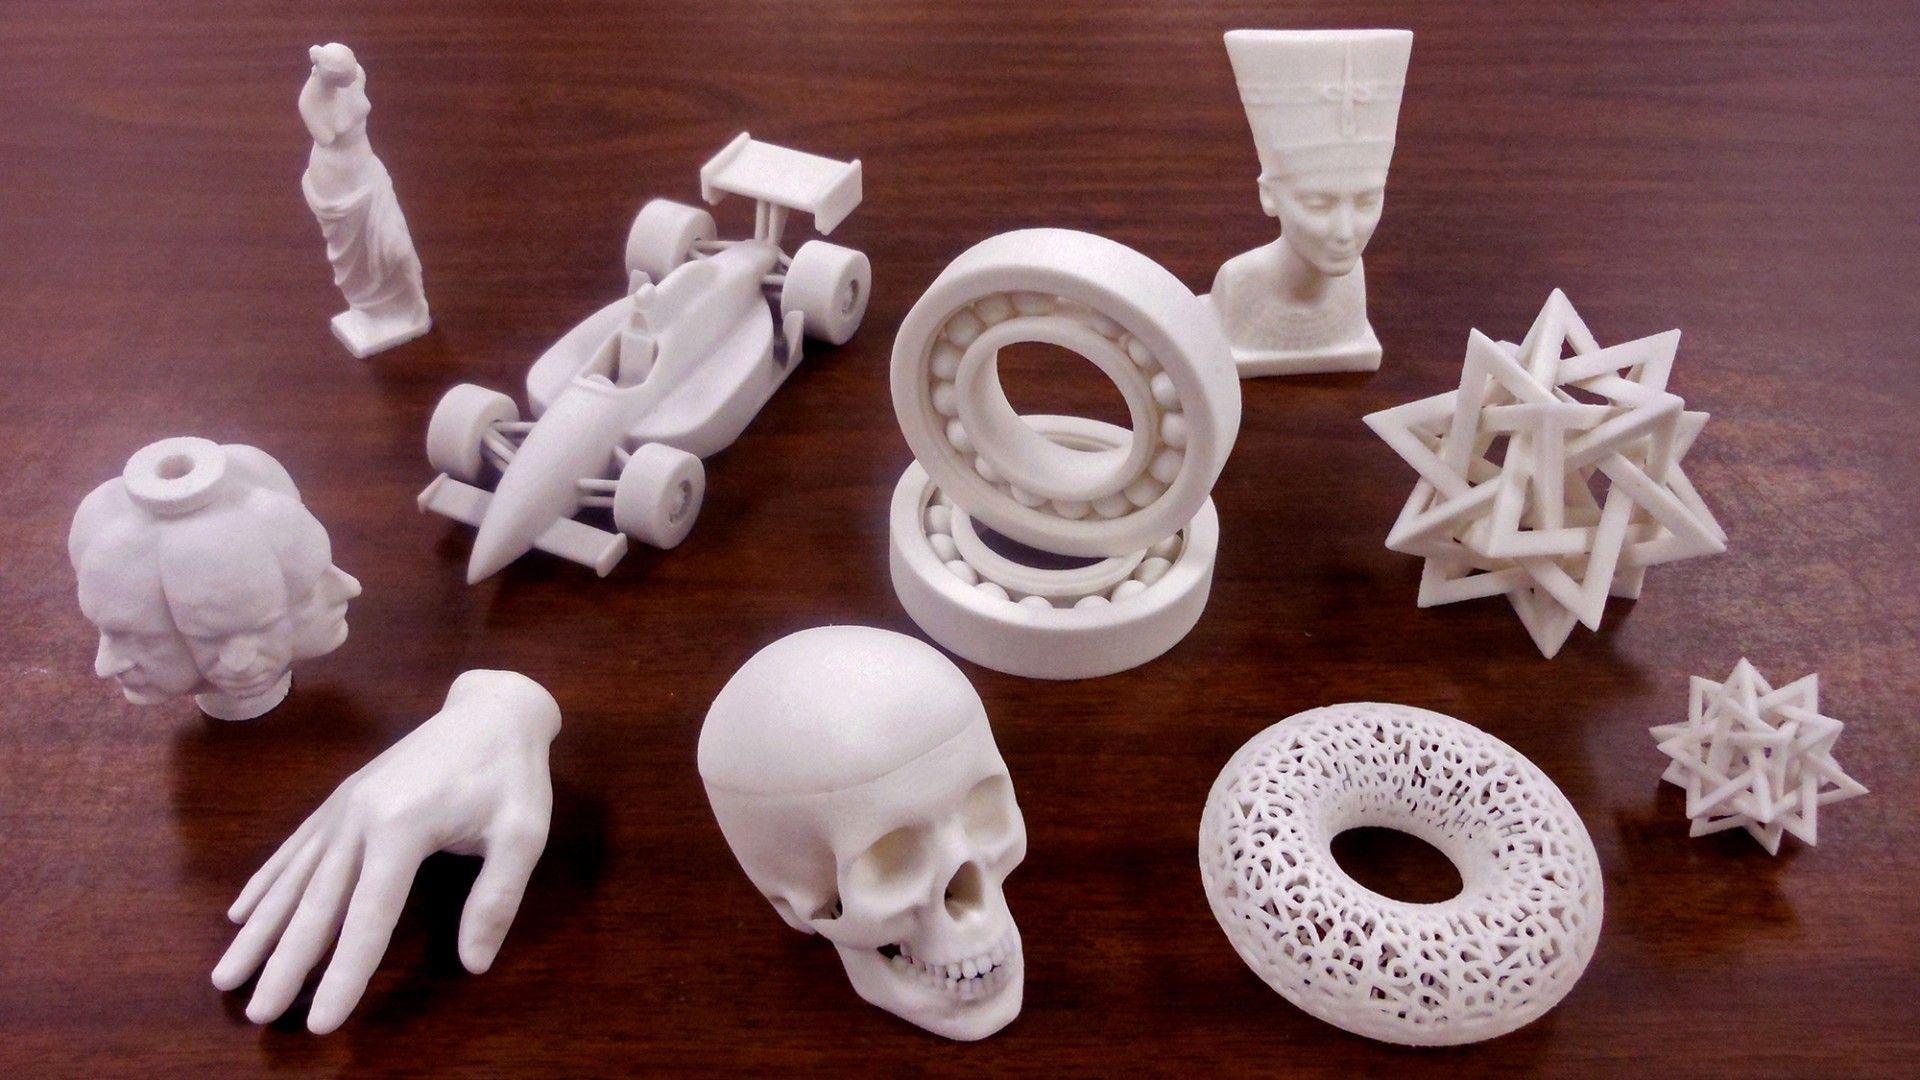 25 Best Sites To Download Free Stl Files To 3D Print | All3Dp | 3D - Free 3D Printable Models